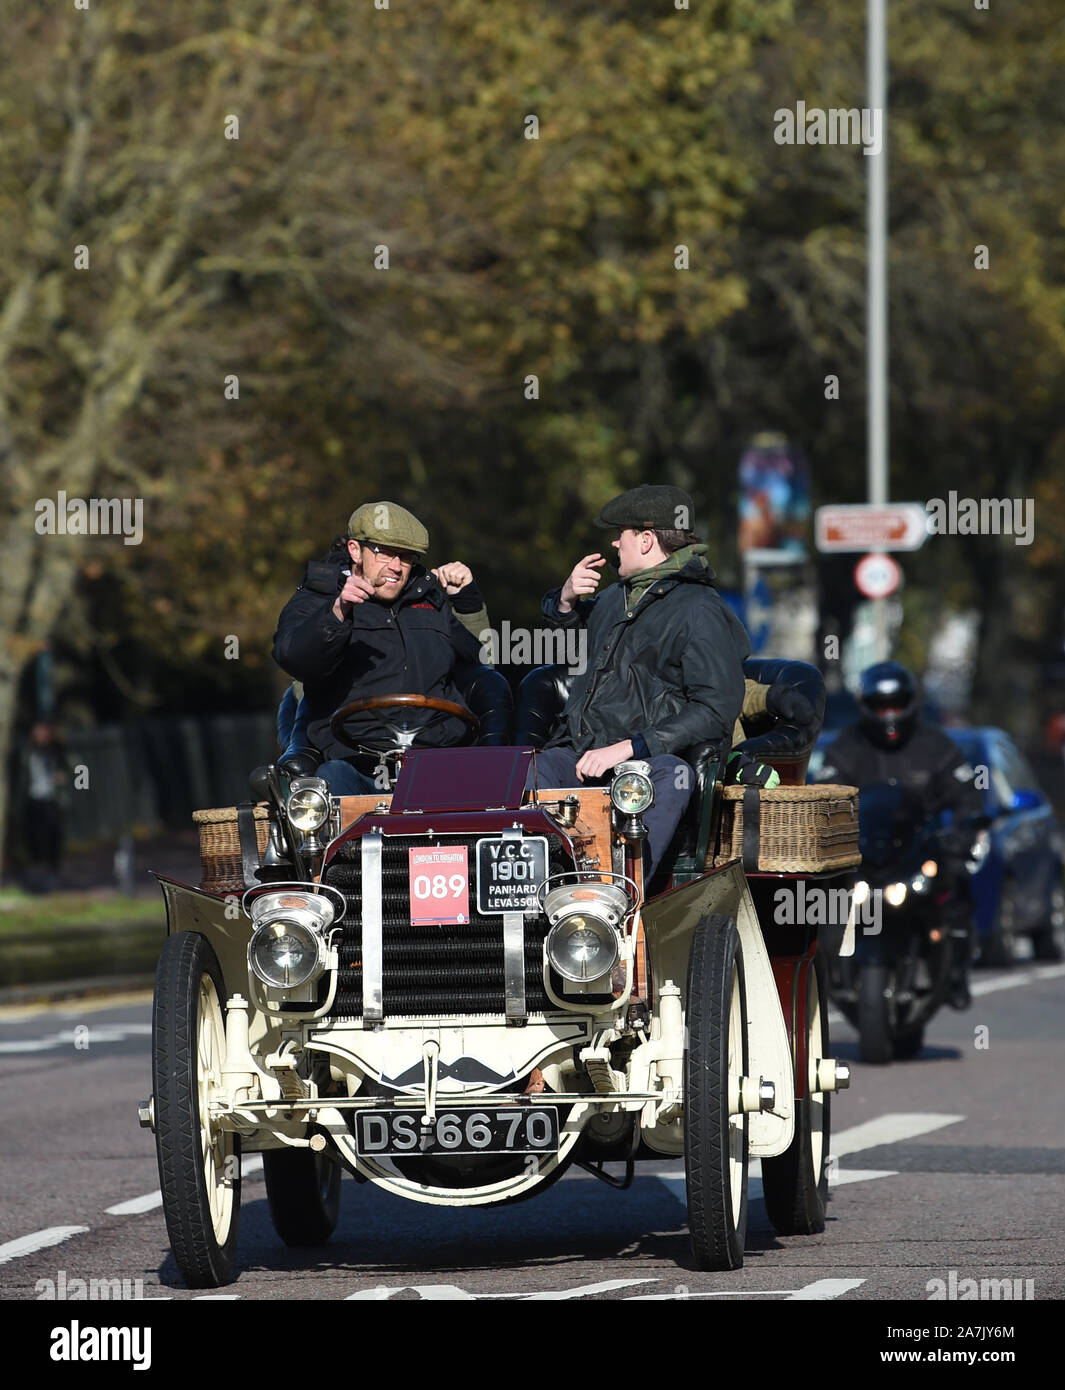 Brighton UK 3rd November 2019 - A 1901 Panhard Levassor  nears the finish of the Bonhams London to Brighton Veteran Car Run. Over 400 pre-1905 cars set off from Hyde Park London early this morning and finish at Brighton's Madeira Drive on the seafront : Credit Simon Dack / Alamy Live News Stock Photo